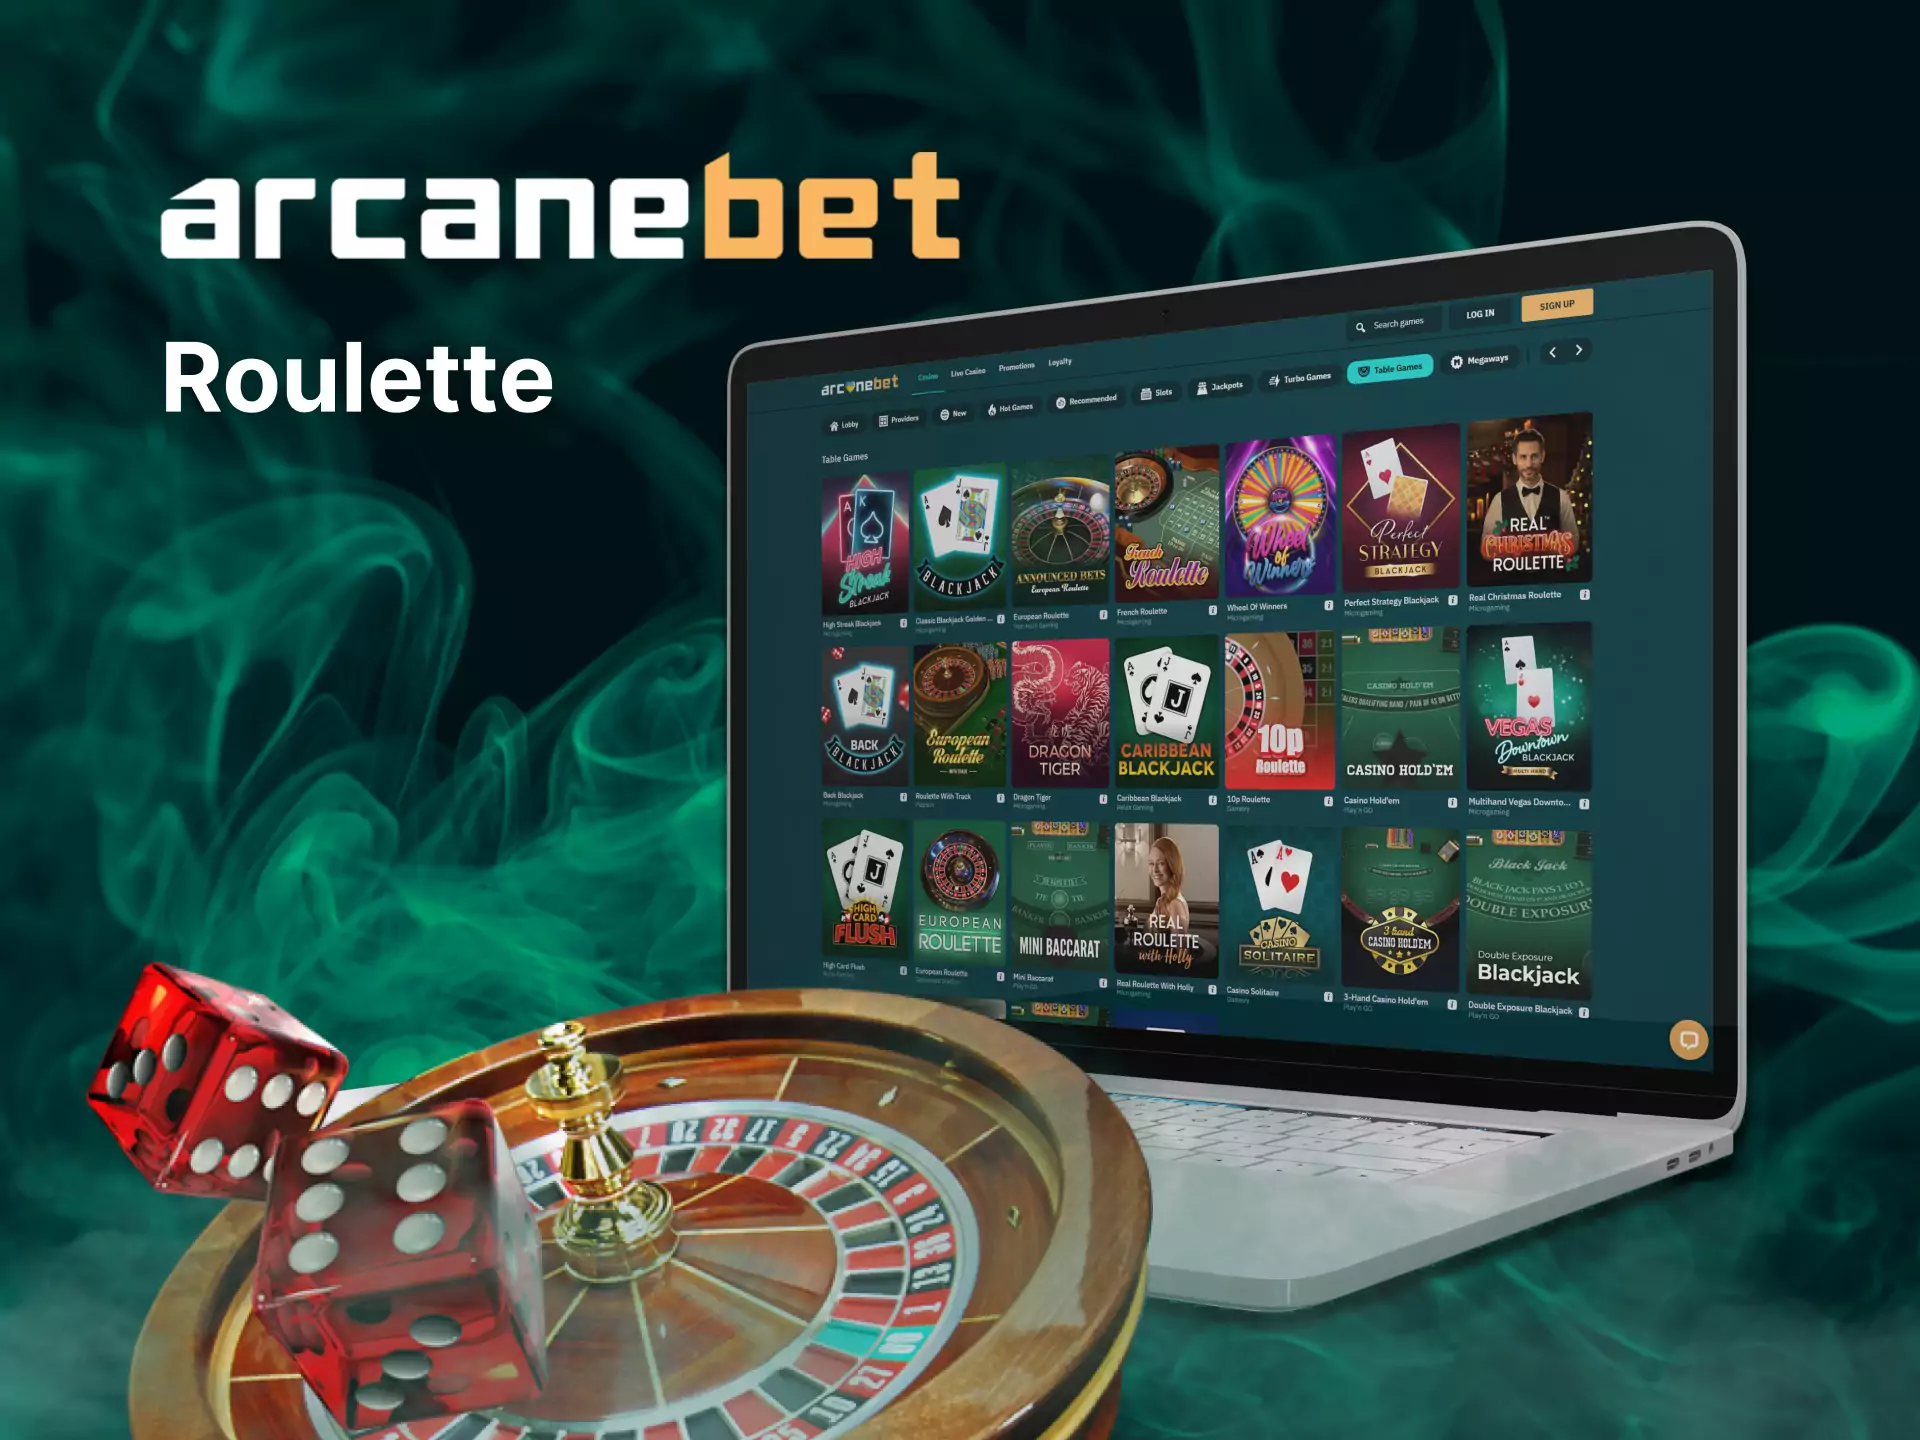 Place bets on roulette at the Arcanebet casino.